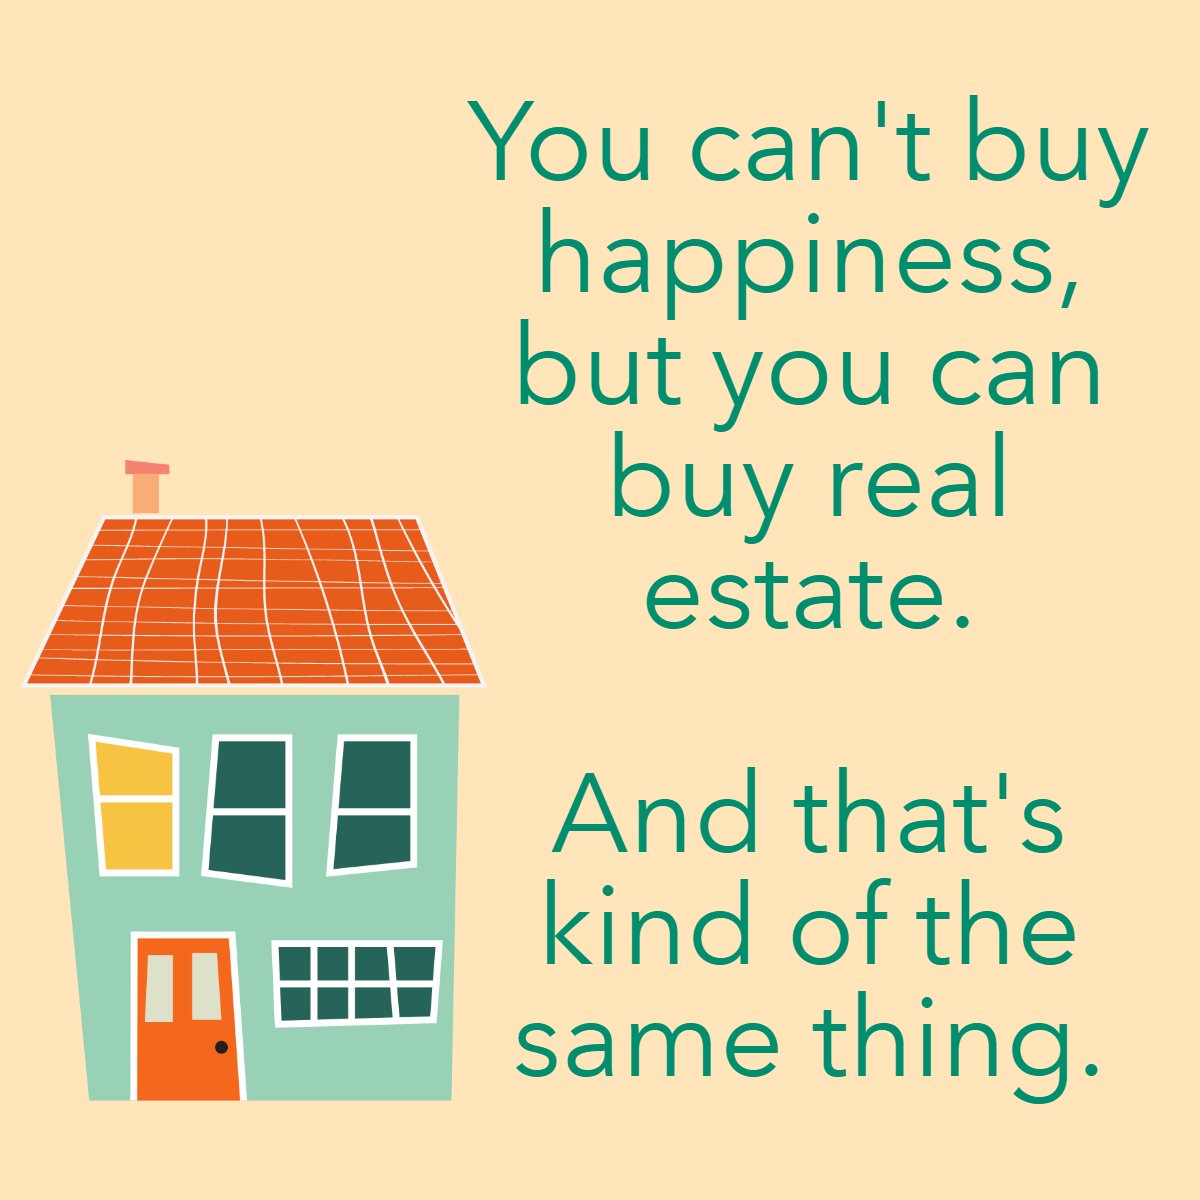 What do you think? 🏠 ❤️

#happiness #realestate #happinessquotes #myhappiness #realestatelifestyle #realestatecoach
 #Realestate #Brokerlife #Marketupdate #thevisiongroup #thevisiongroupres #realtor #Orangecounty #losangelescounty #Riversidecounty